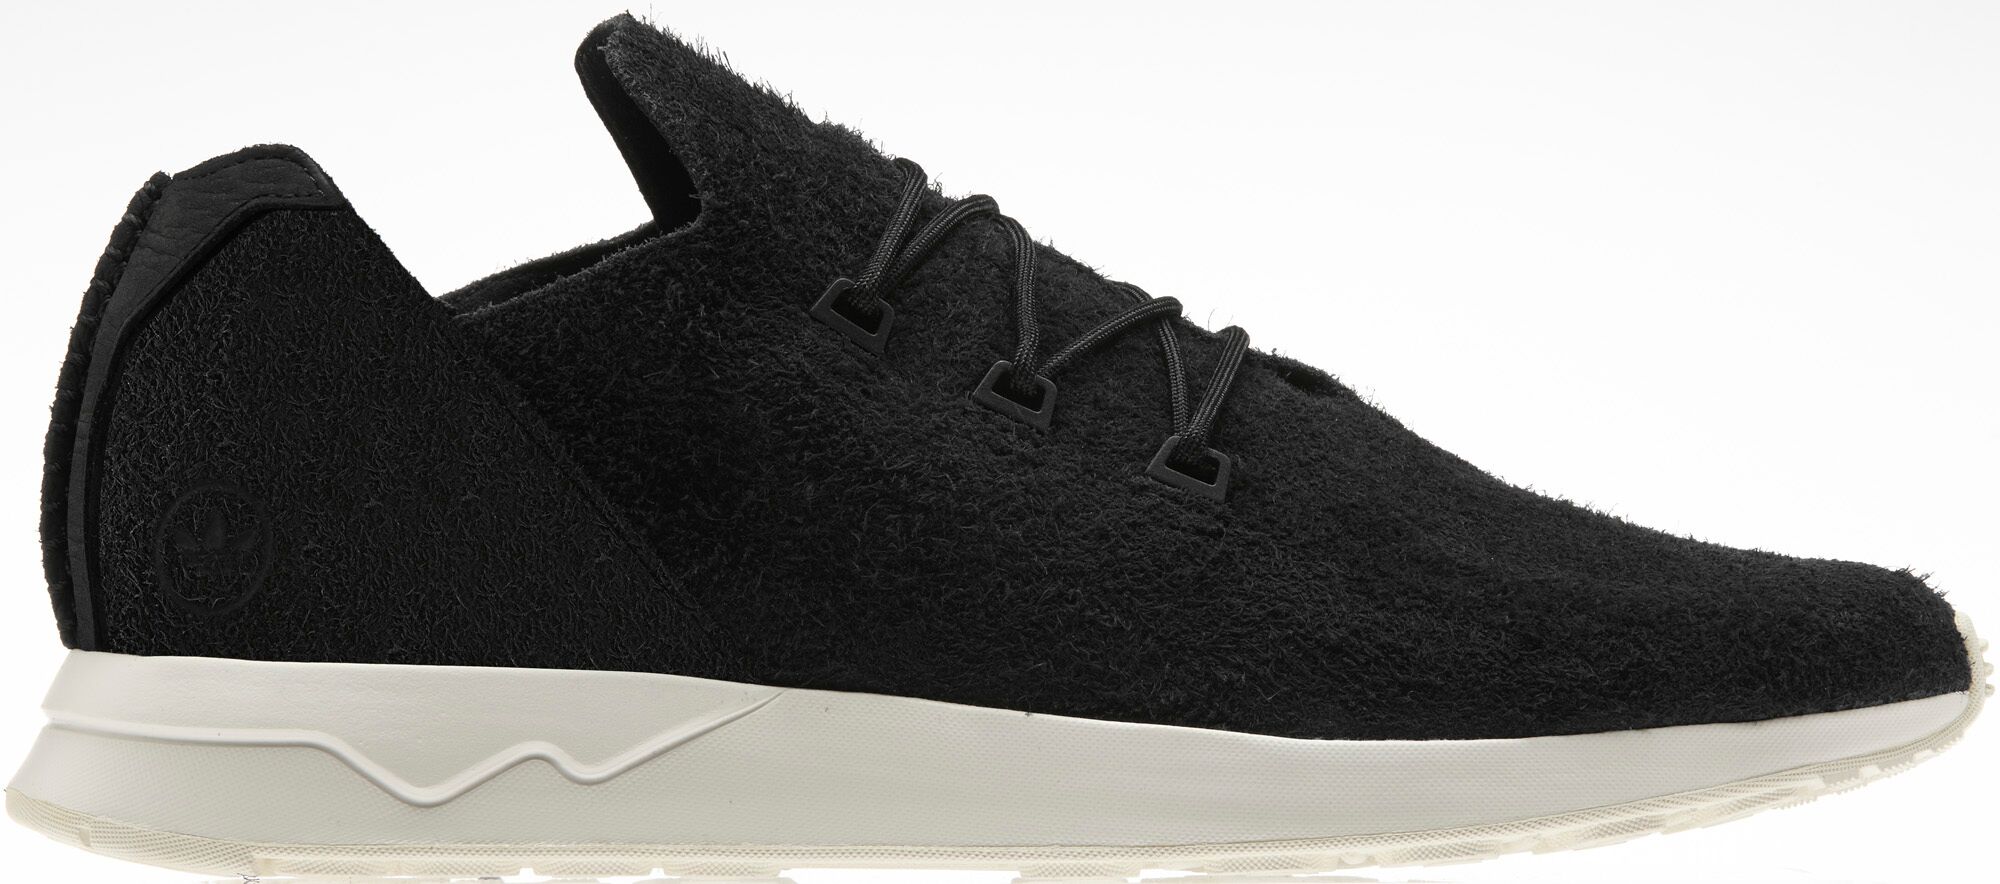 WINGS + HORNS x adidas ZX Flux ADV X Side Pair